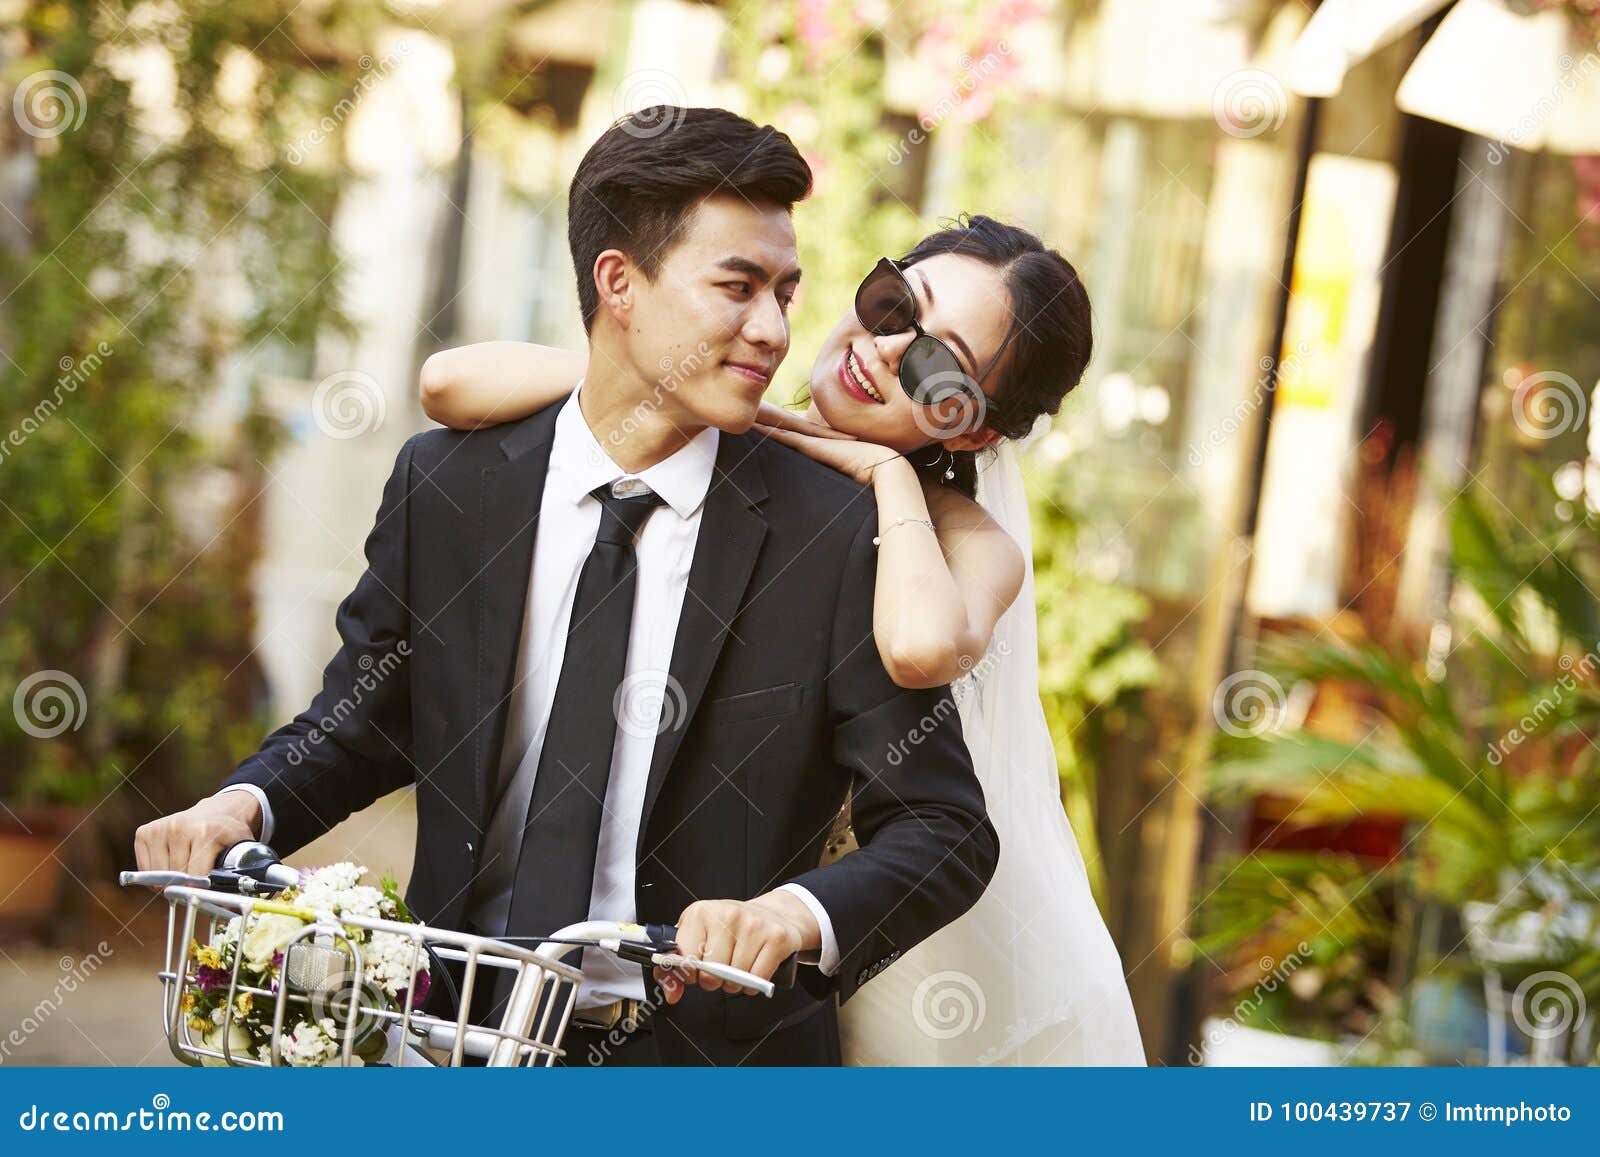 asian newly wed couple riding a bicycle